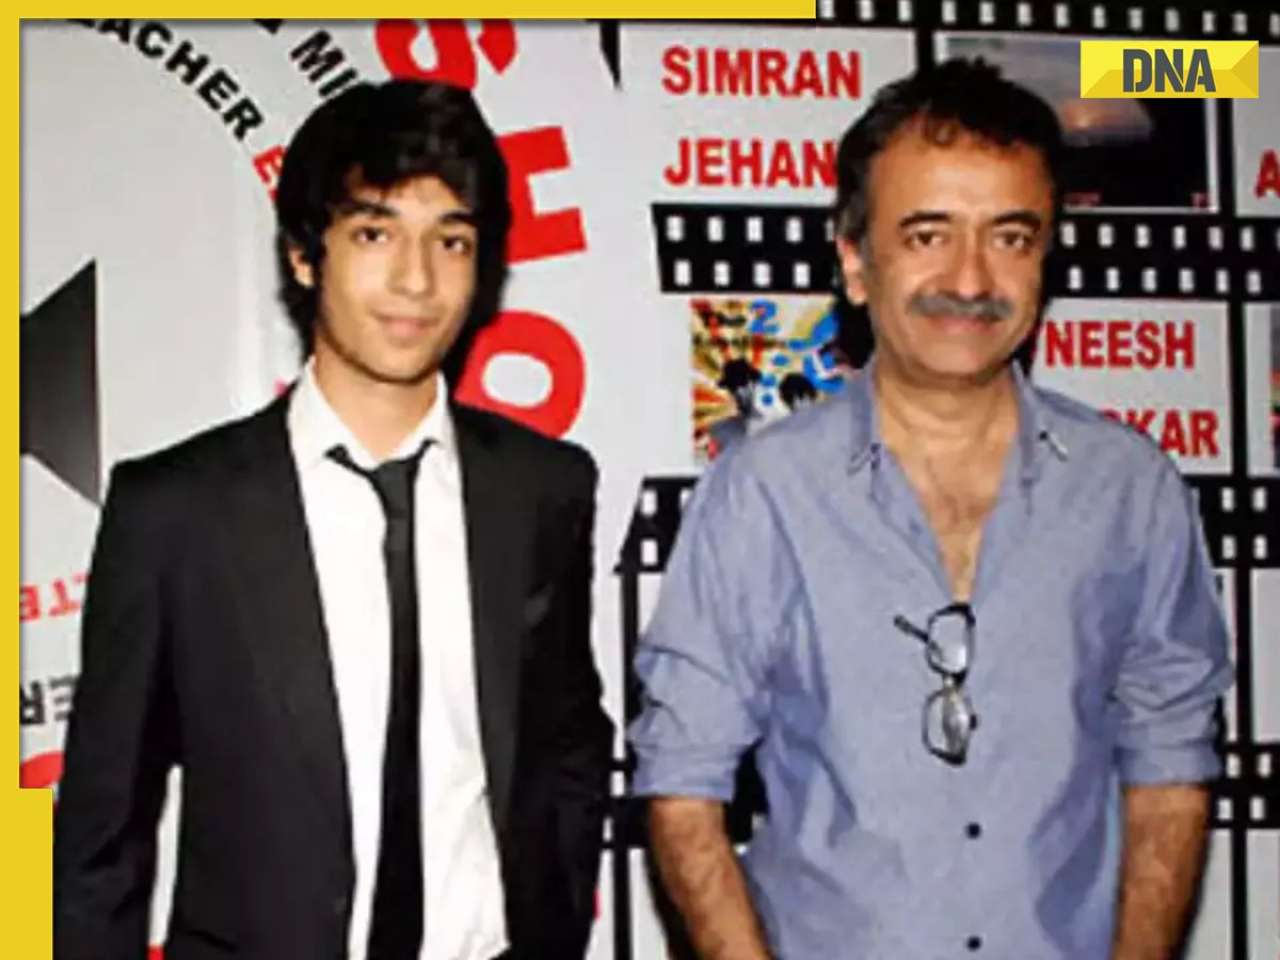 Meet Vir Hirani, Rajkumar Hirani's son who skipped his father's production for his acting debut, will be seen in...